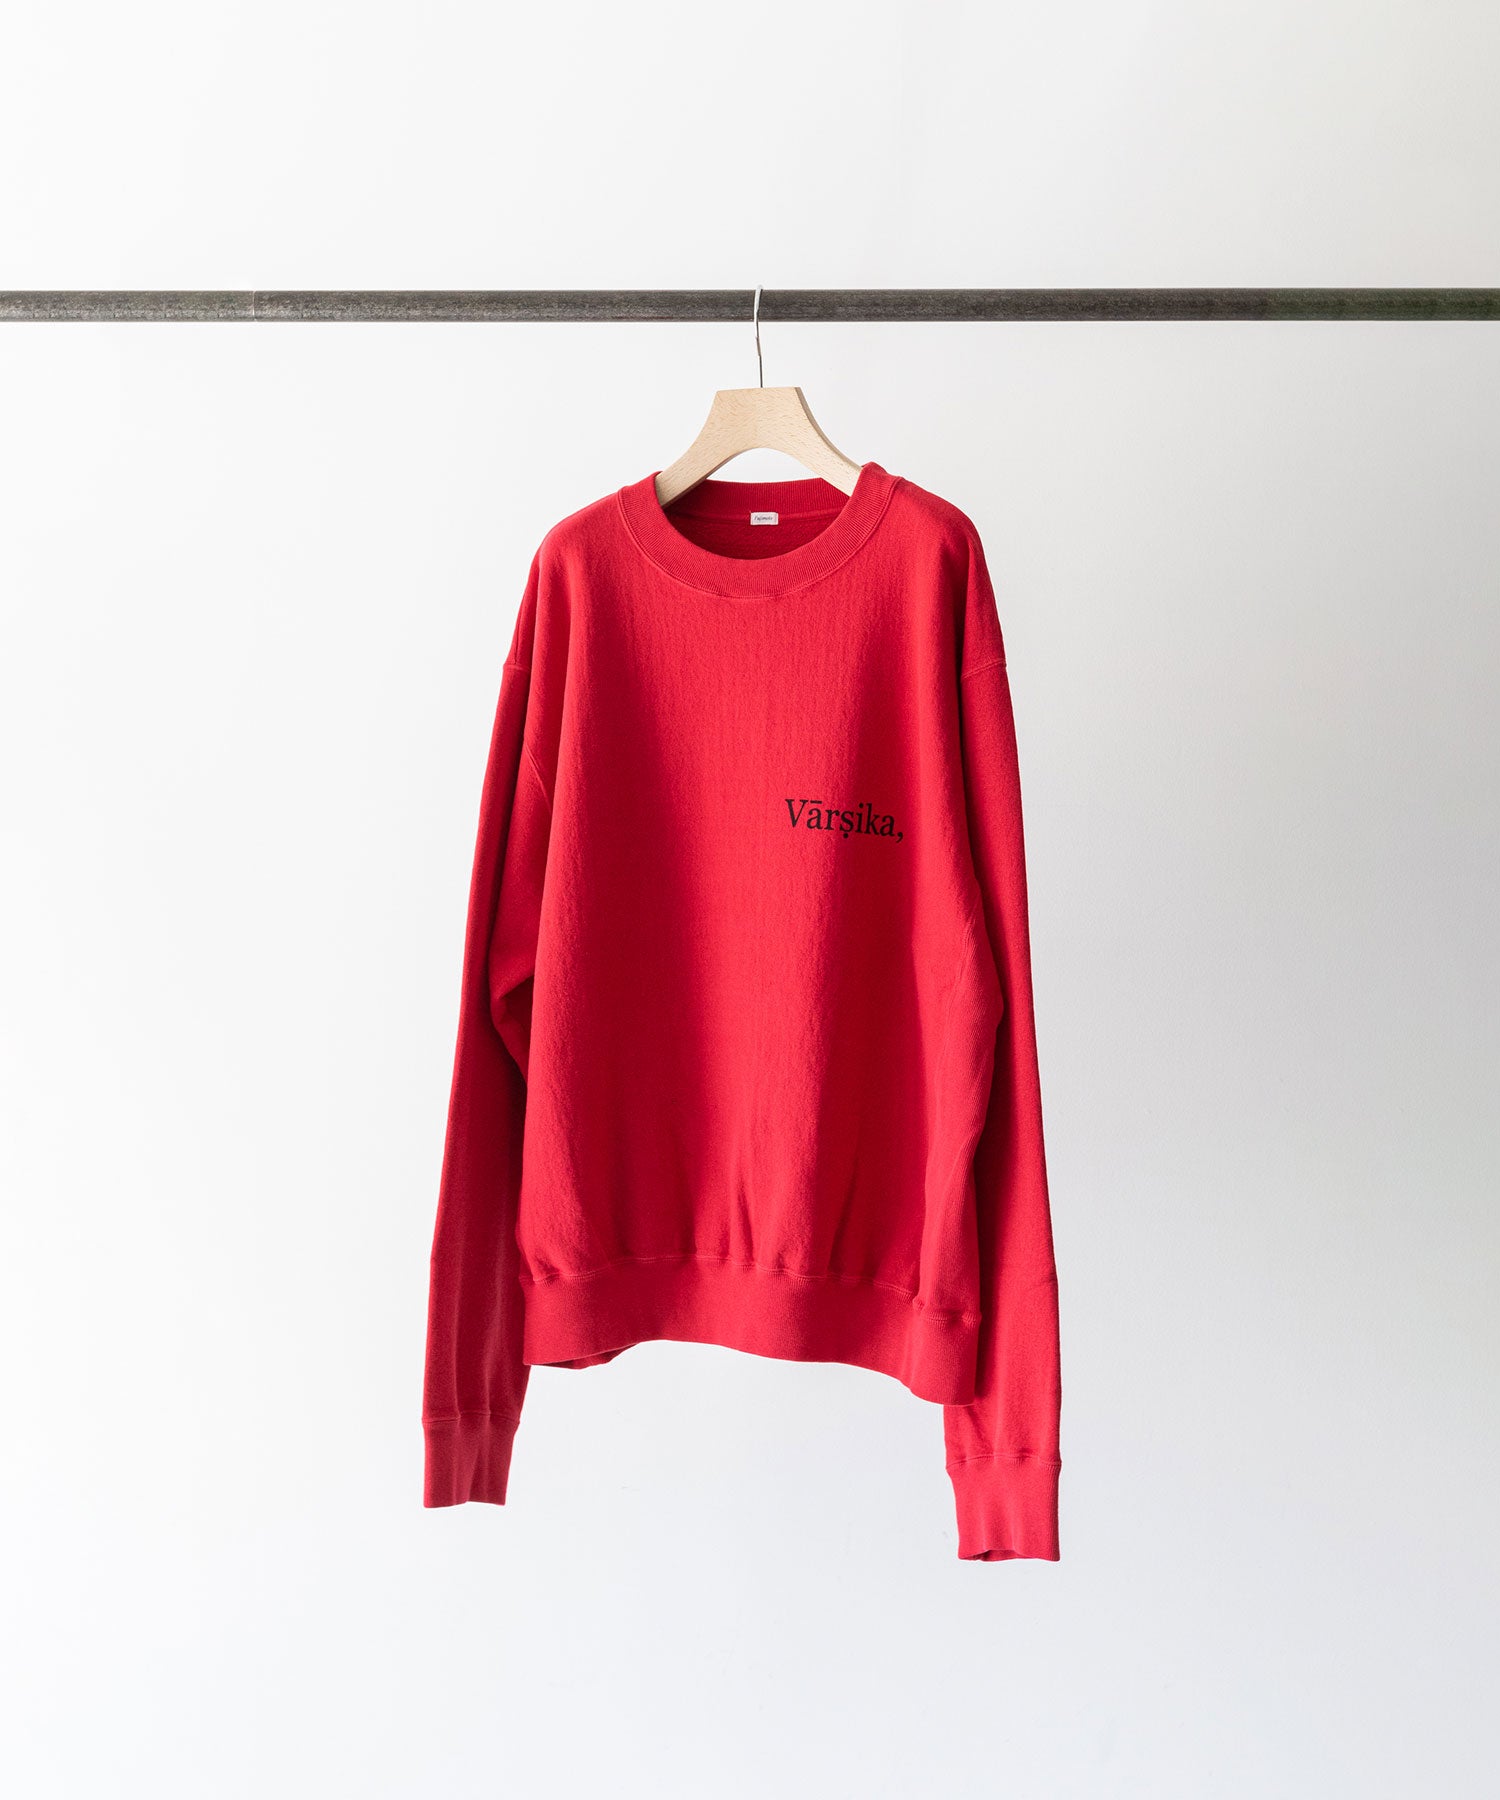 【Fujimoto】OVER DYED SWEAT SHIRT WHITH A.S - RED